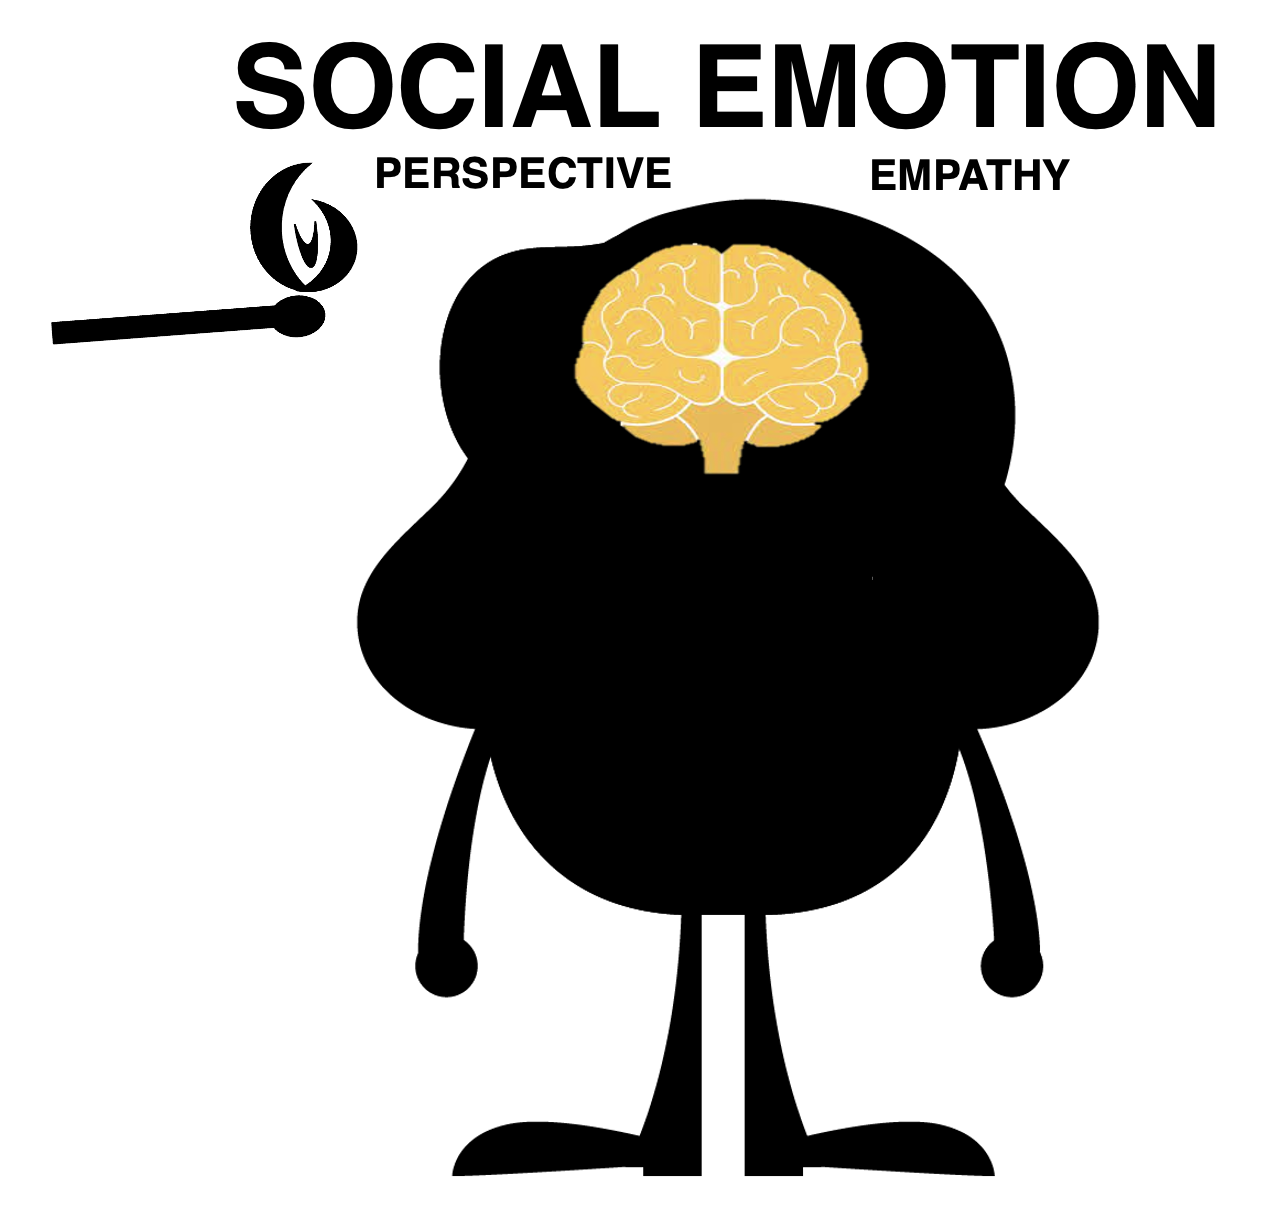 Fundraising requires social emotion which requires perspective and empathy to connect.